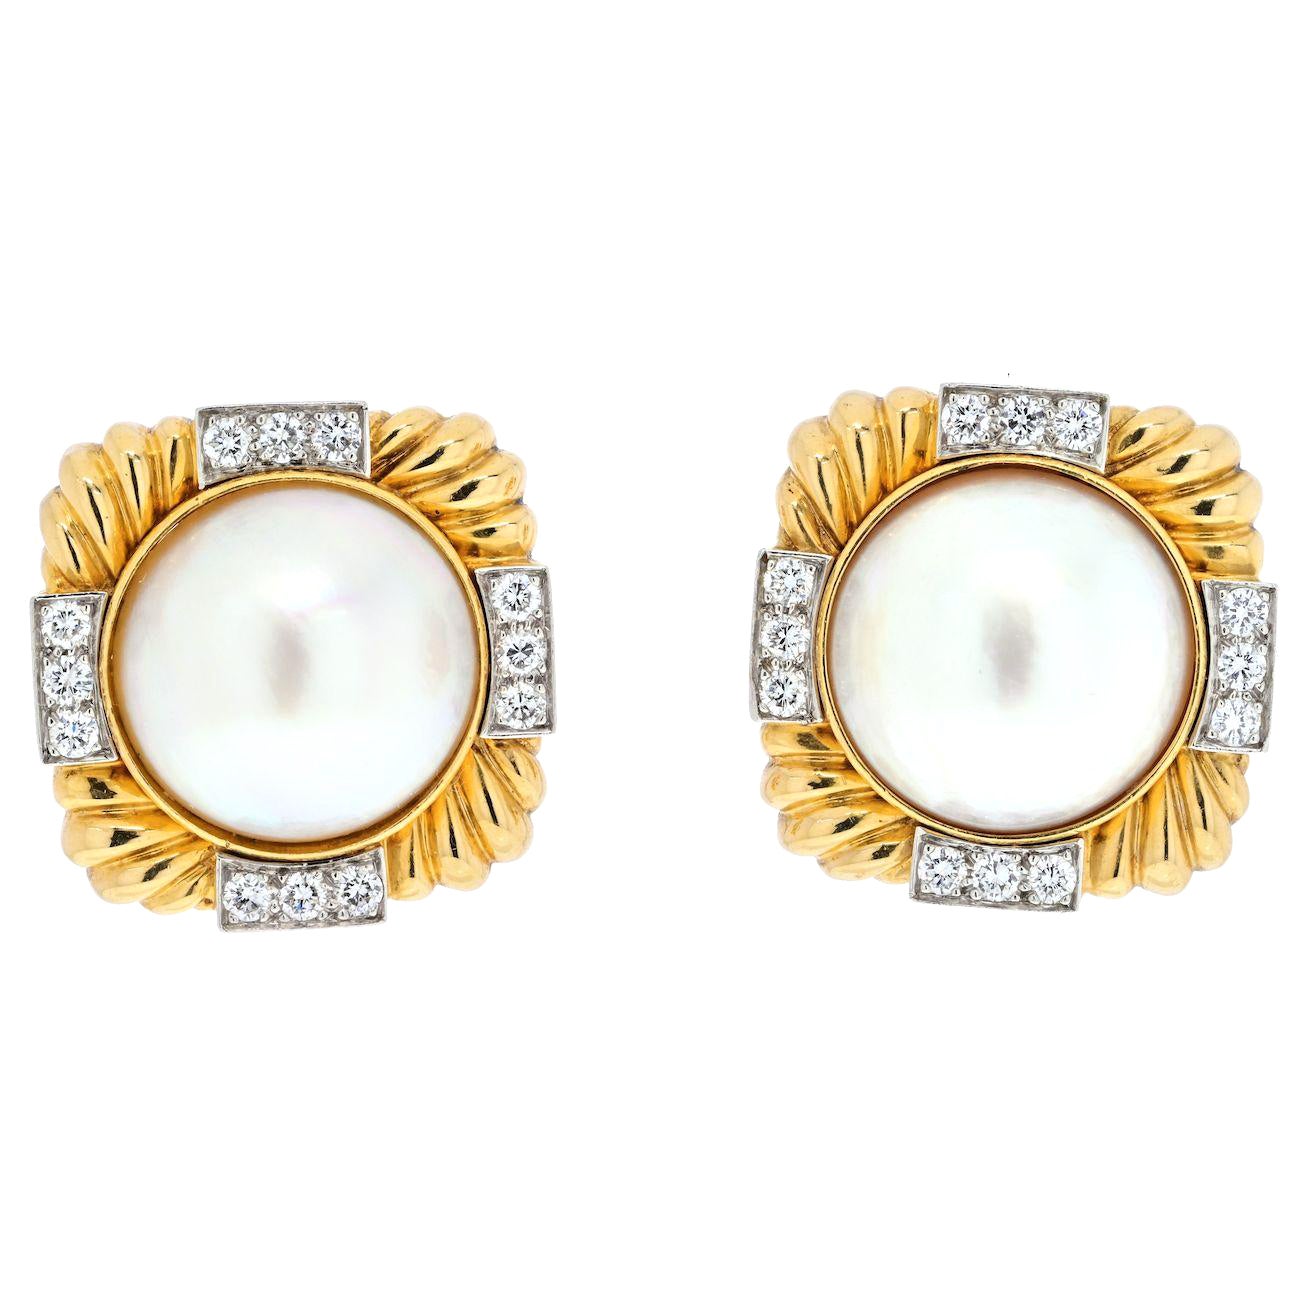 David Webb Platinum & 18K Yellow Gold Fluted Diamond And Pearl Clip-On Earrings